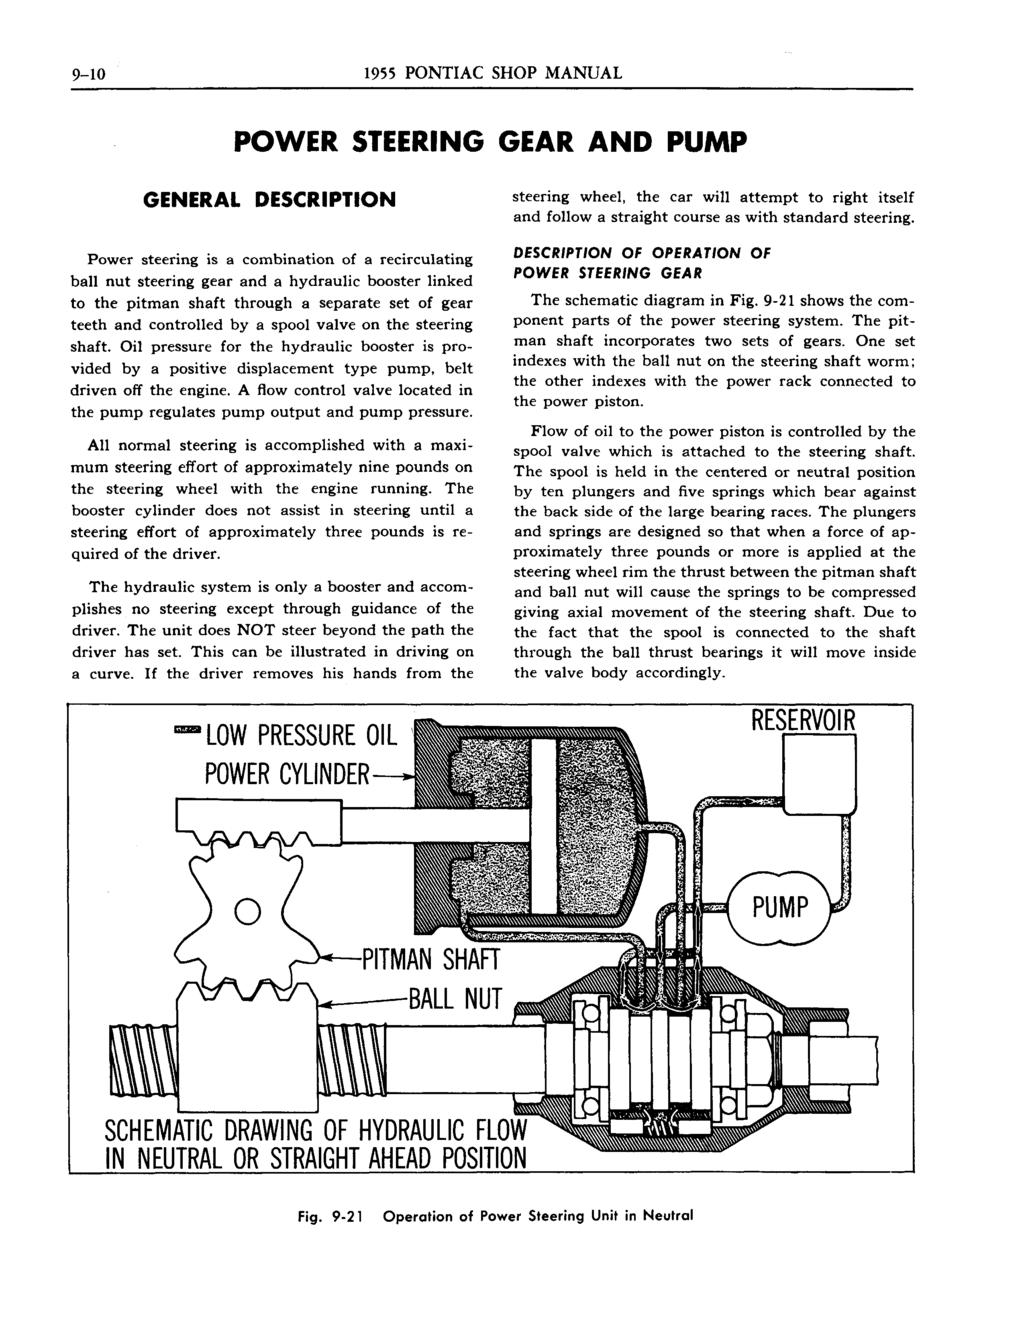 9-10 1955 PONTIAC SHOP MANUAL POWER STEERING GEAR AND PUMP GENERAL DESCRIPTION Power steering is a combination of a recirculating ball nut steering gear and a hydraulic booster linked to the pitman